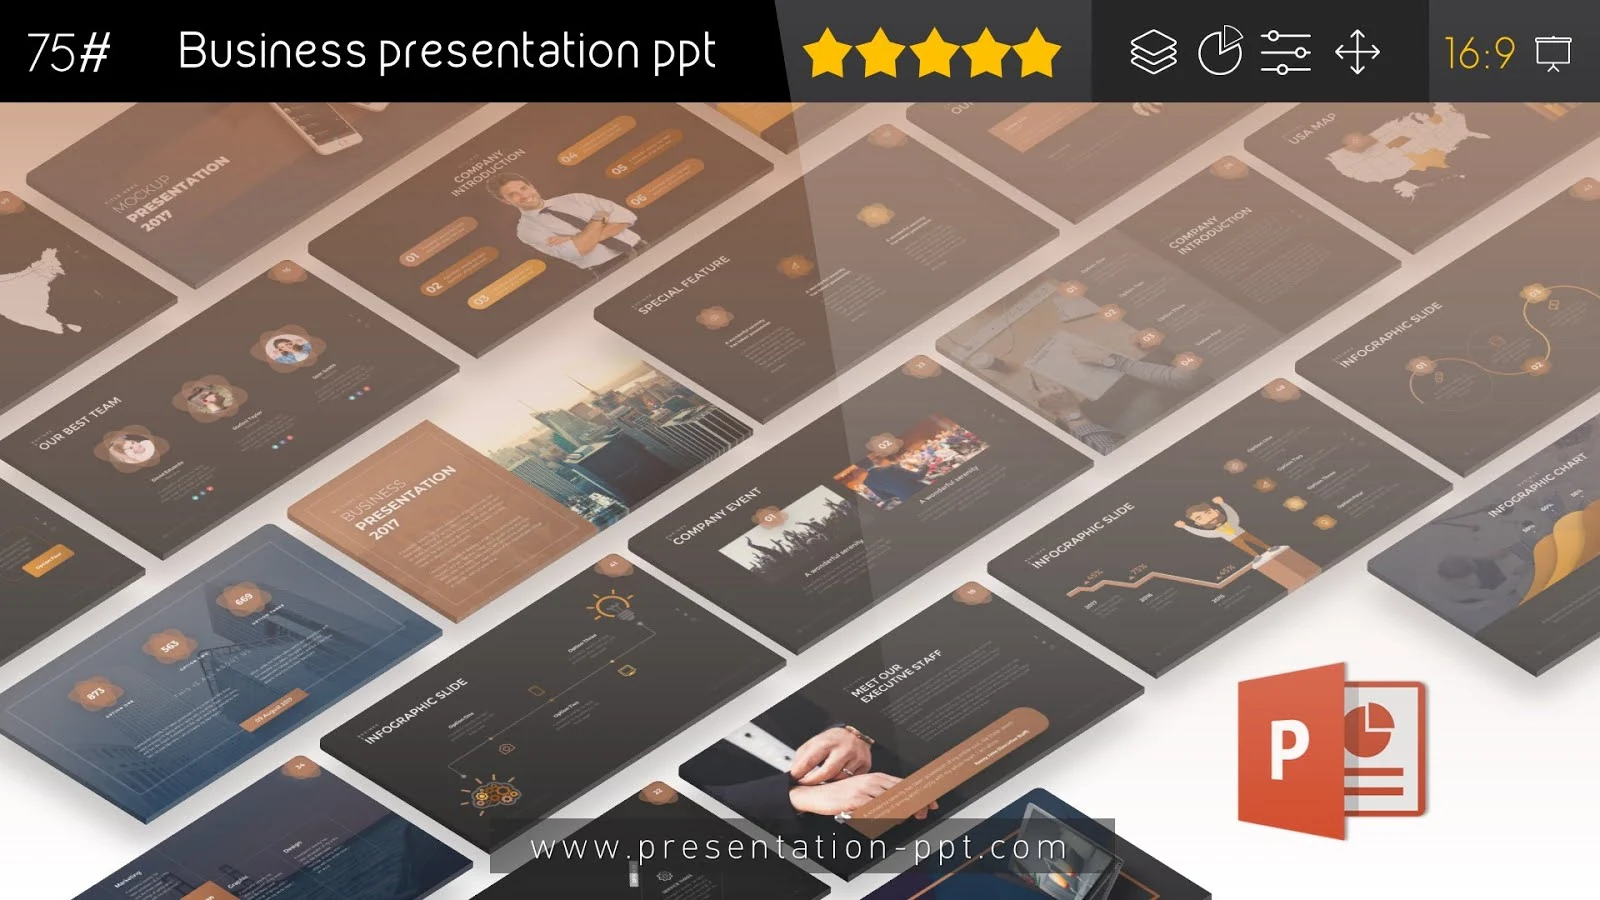 Business presentation powerpoint template free